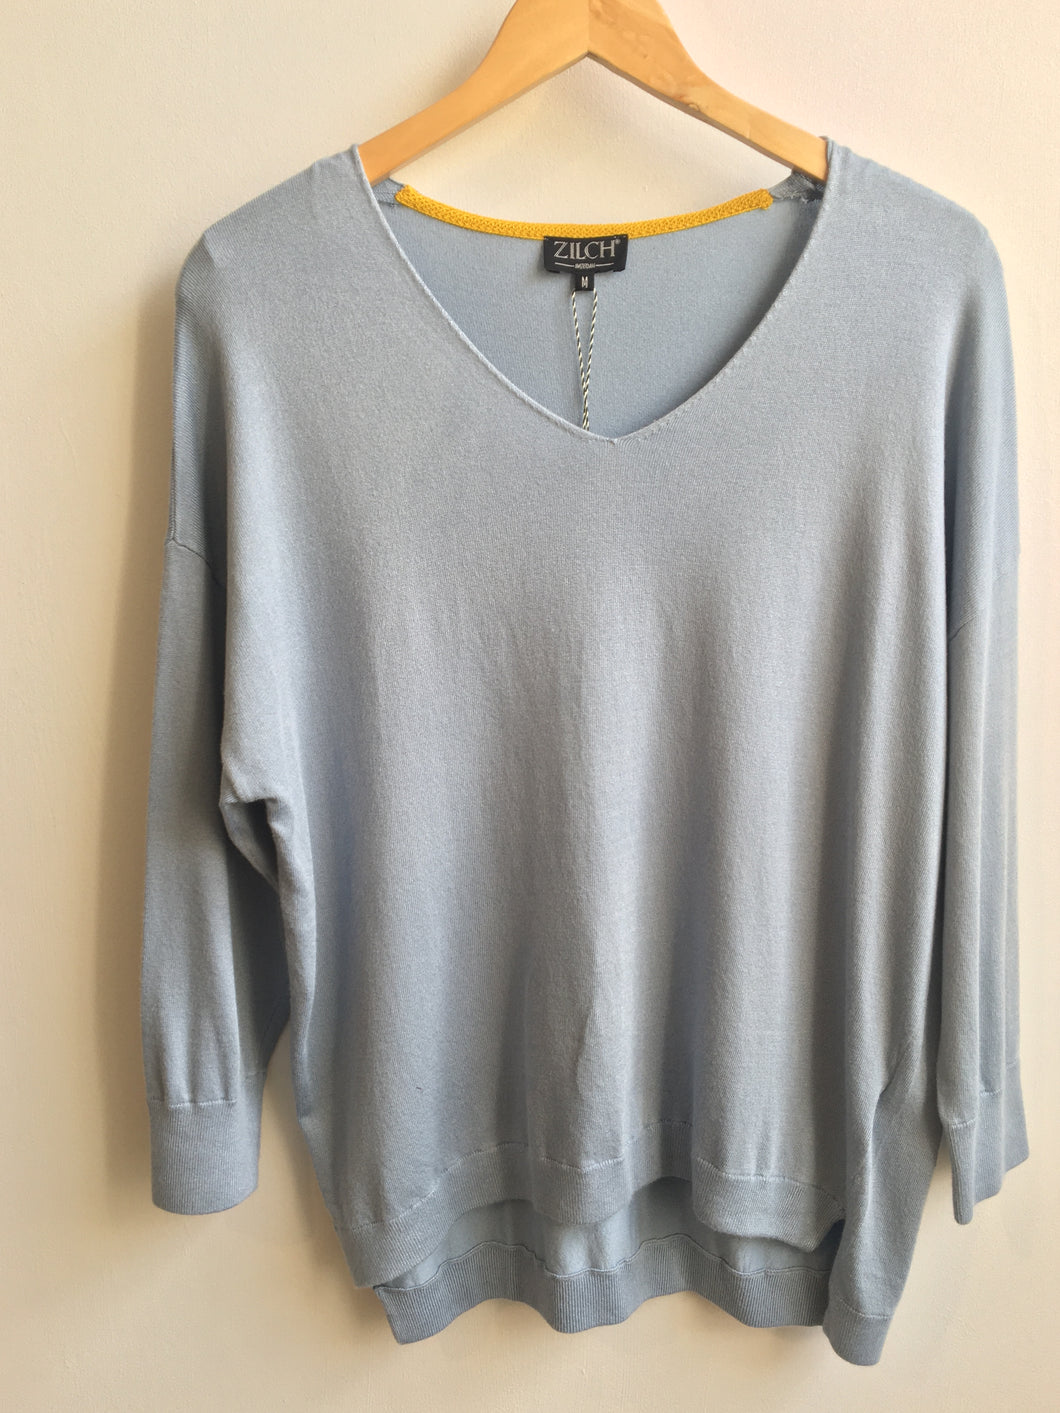 Zilch v-neck bamboo sweater in Heaven blue - CW CW 